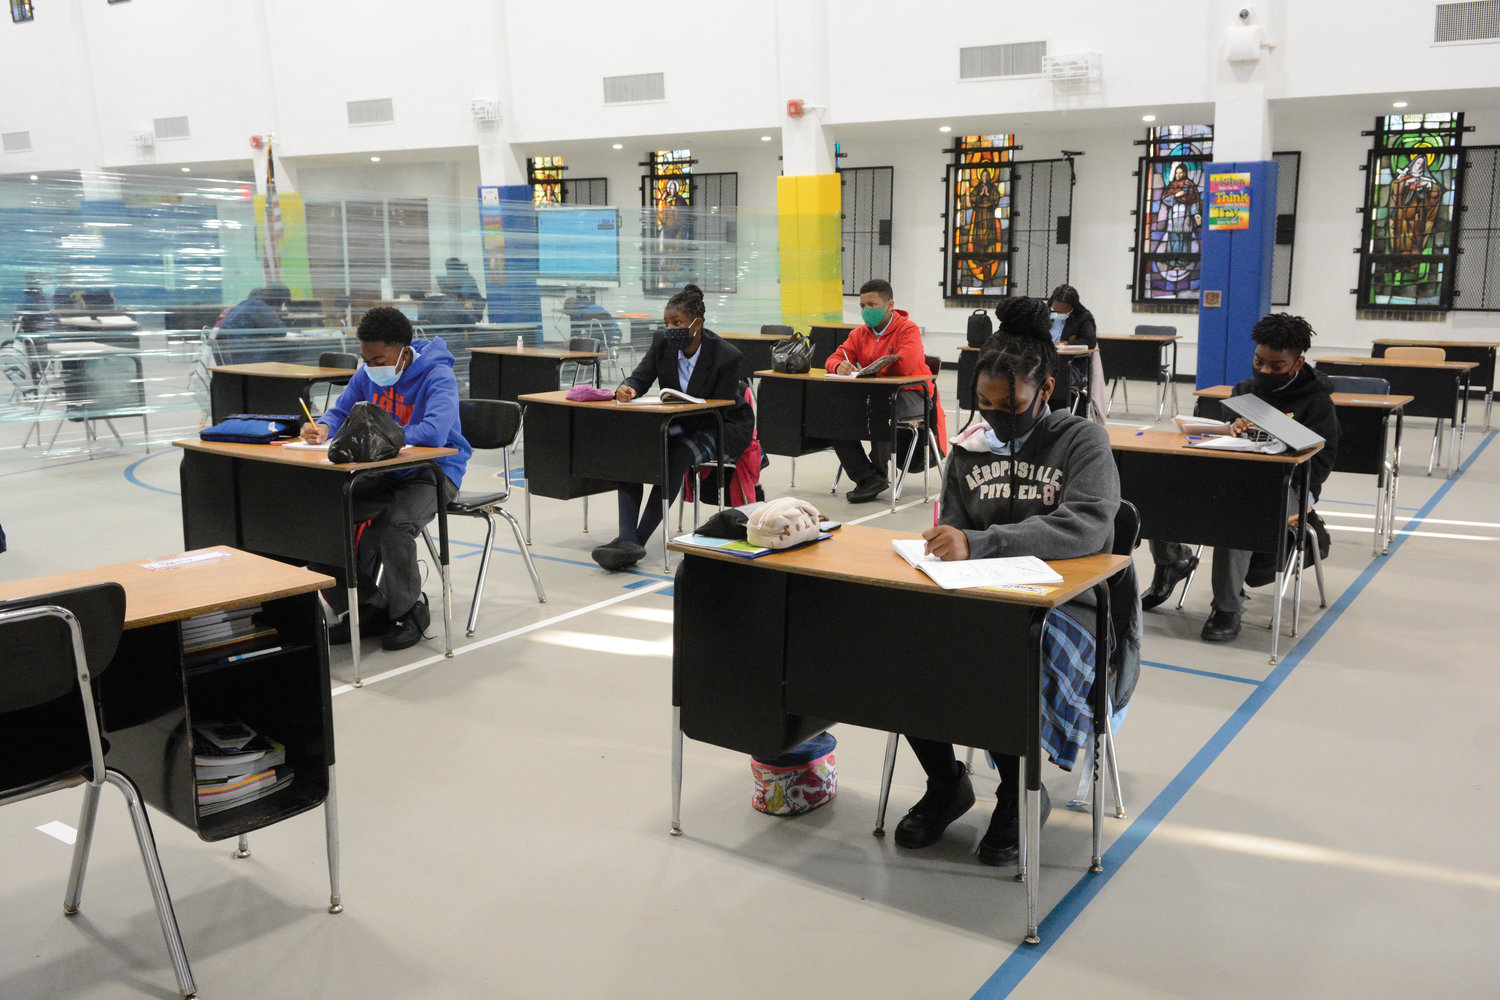 To facilitate social distancing, students in grades 5 to 8 at Our Lady of Grace School in the Bronx are taking classes in the gymnasium that opened during the 2019-2020 school year.